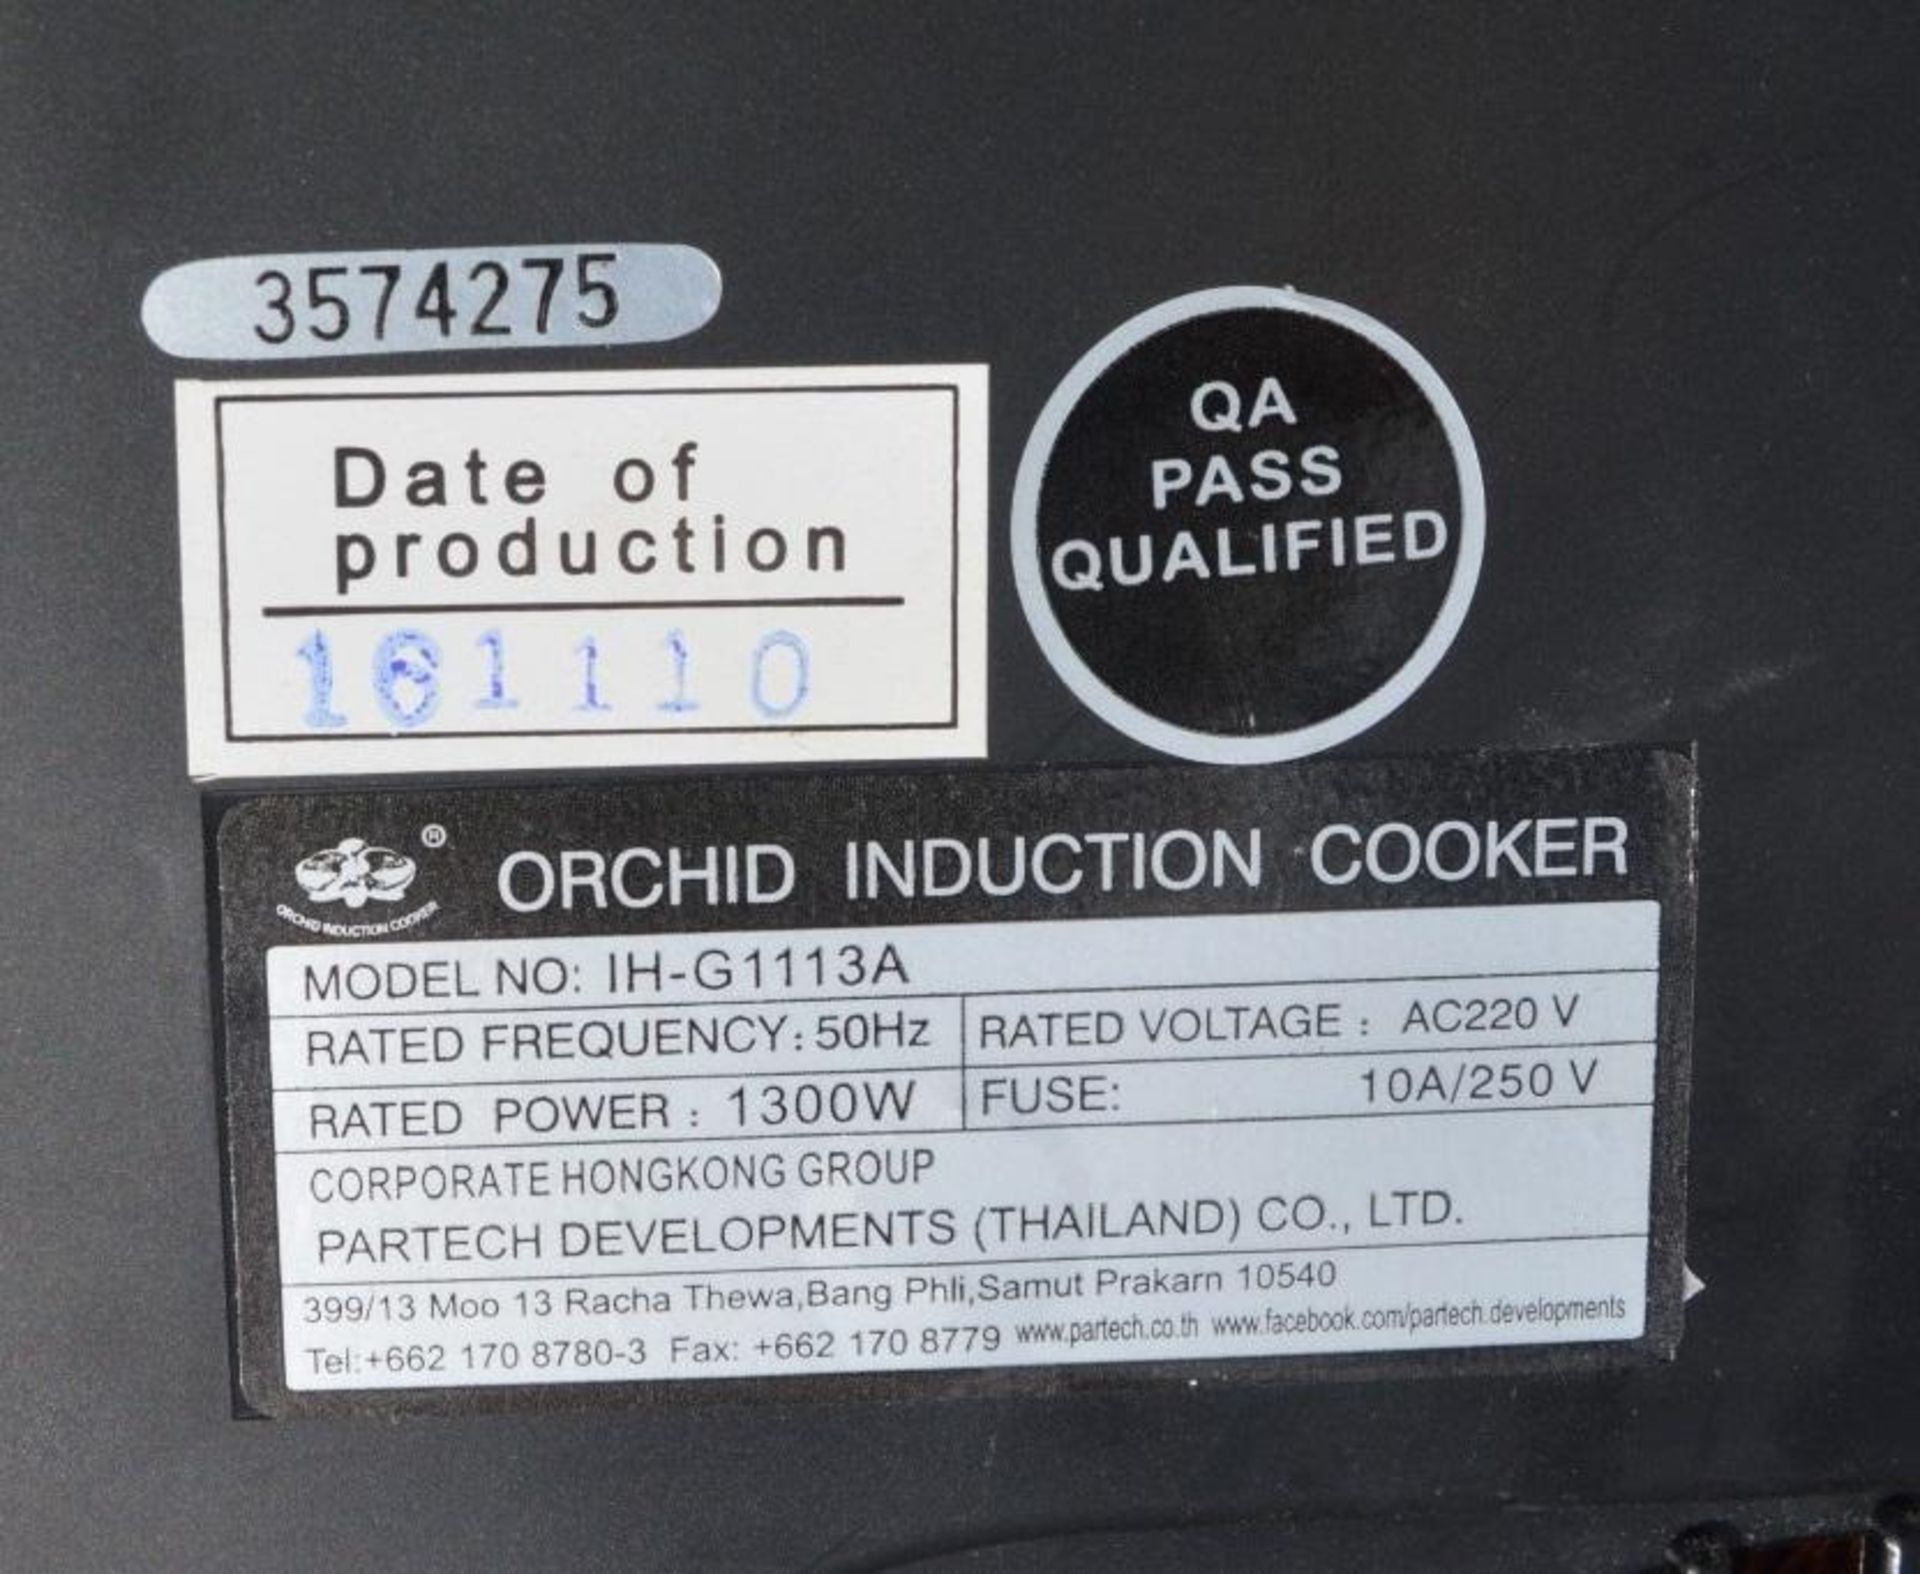 1 x Orchid IH-G1113A Induction Cooker - Pre-owned, Taken From An Asian Fusion Restaurant - Ref: MC78 - Image 3 of 5